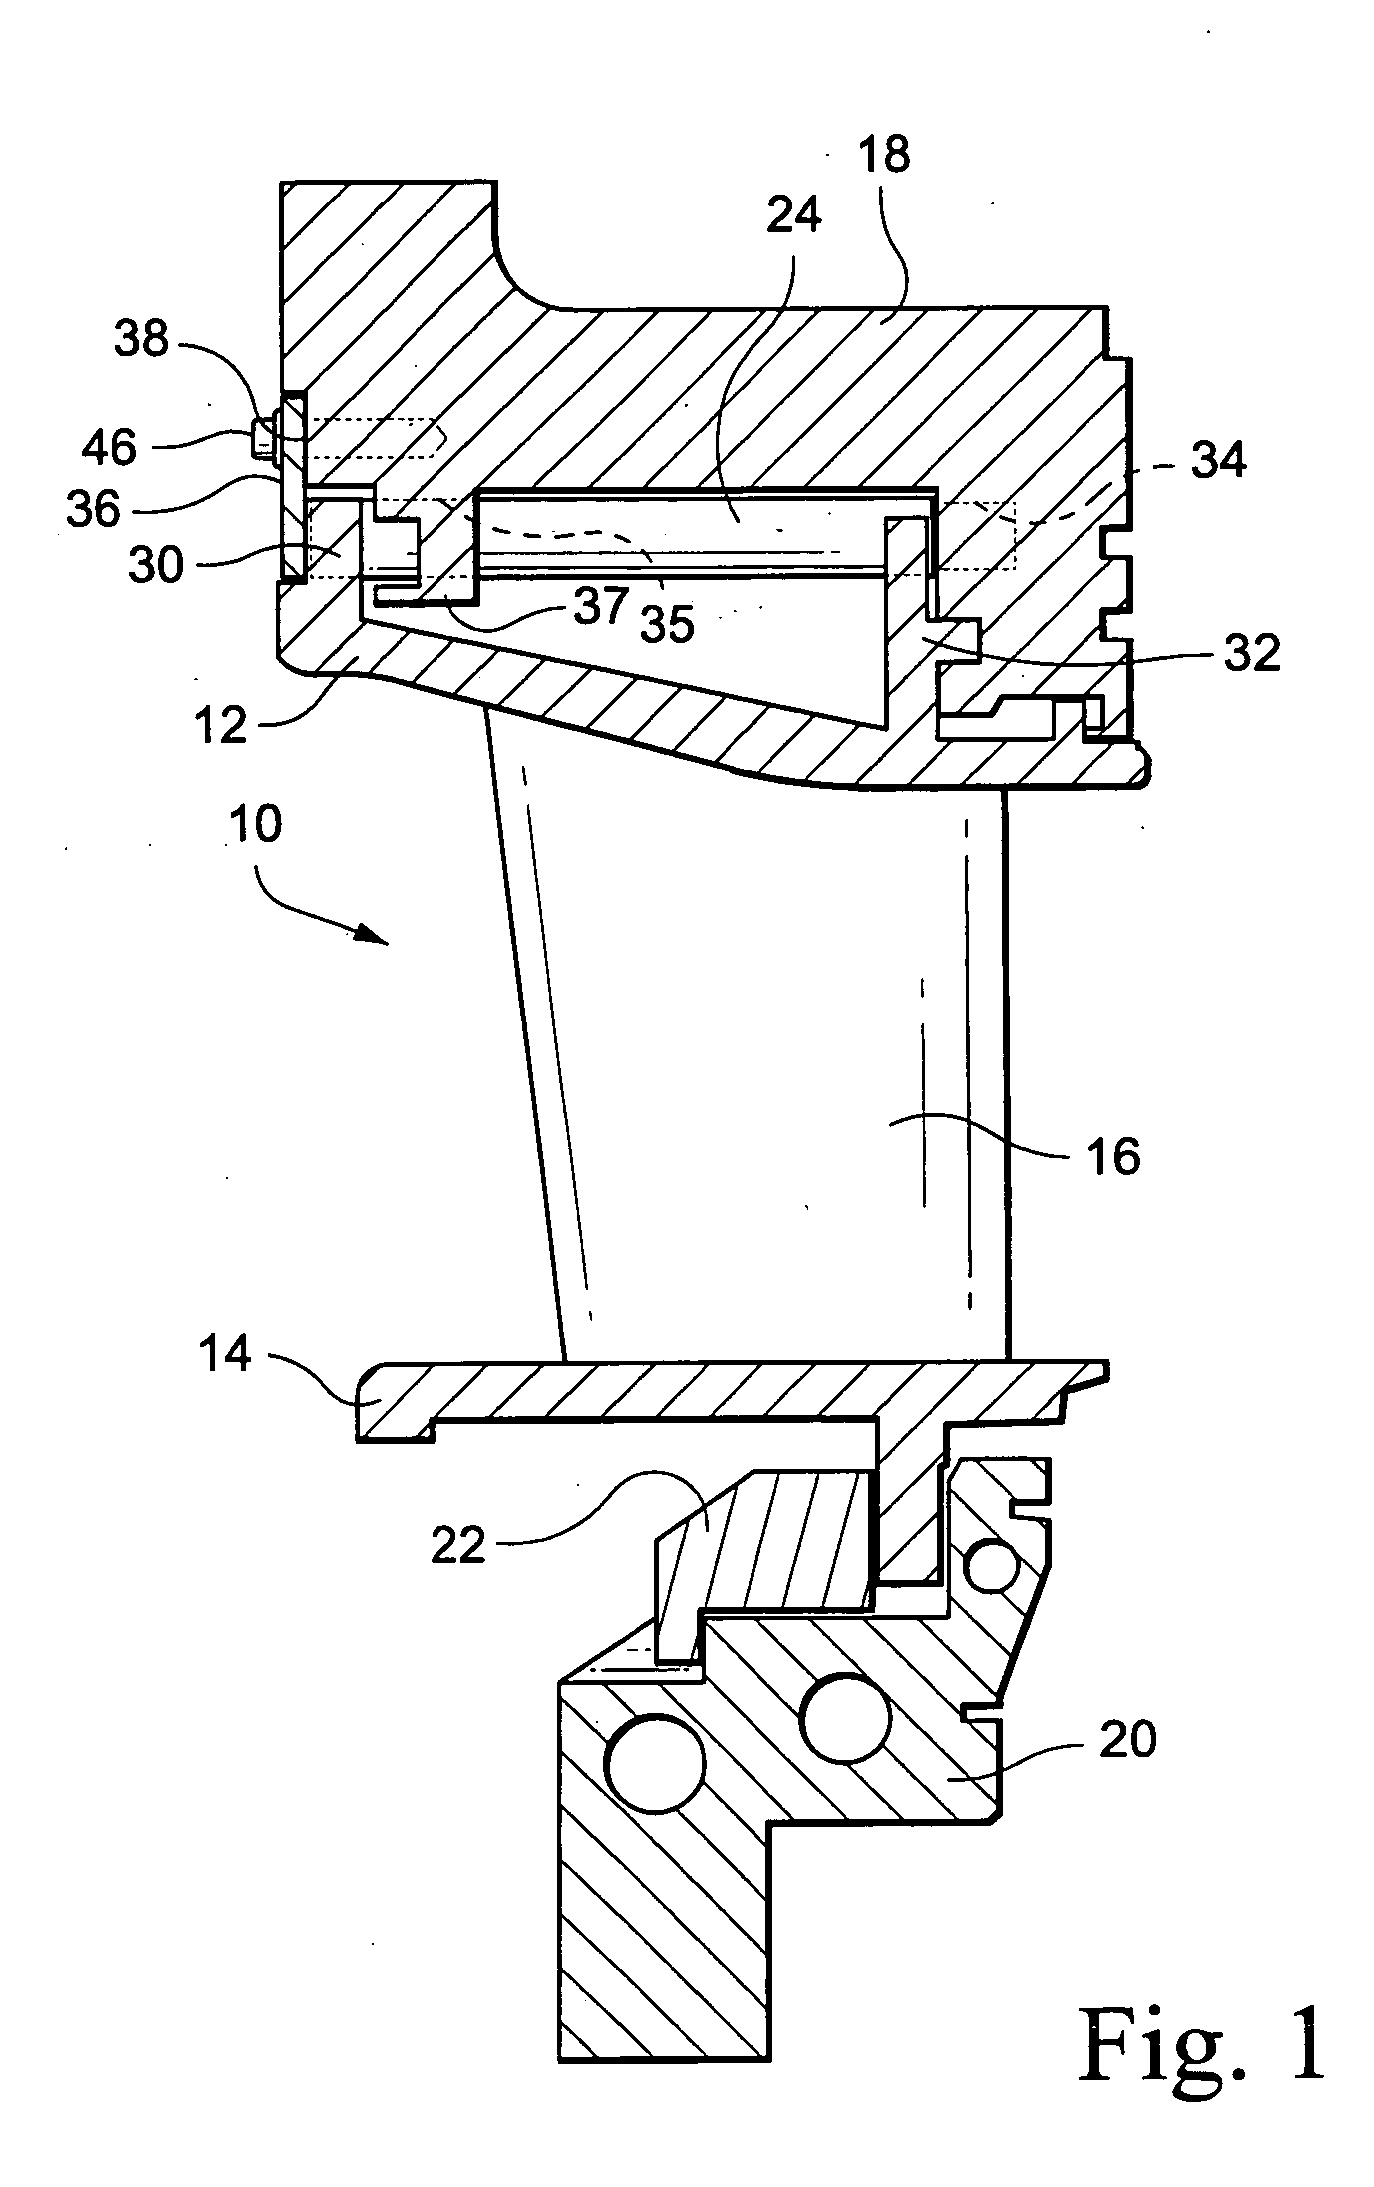 Apparatus and methods for removing and installing a selected nozzle segment of a gas turbine in an axial direction